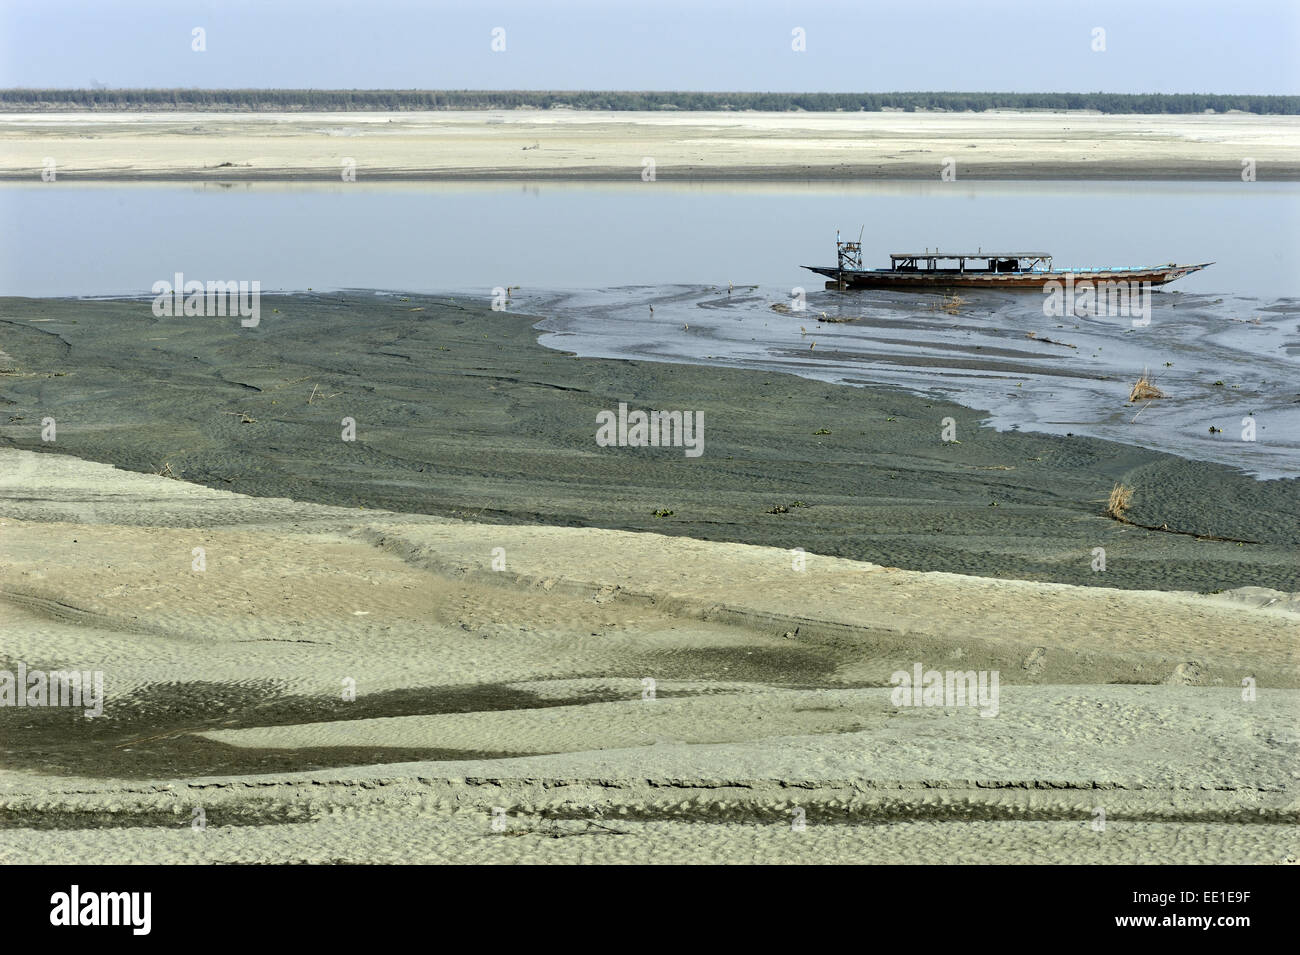 View of riverbank and river with low water levels, with stranded boat, River Brahmaputra, Kaziranga N.P., Assam, India, January Stock Photo